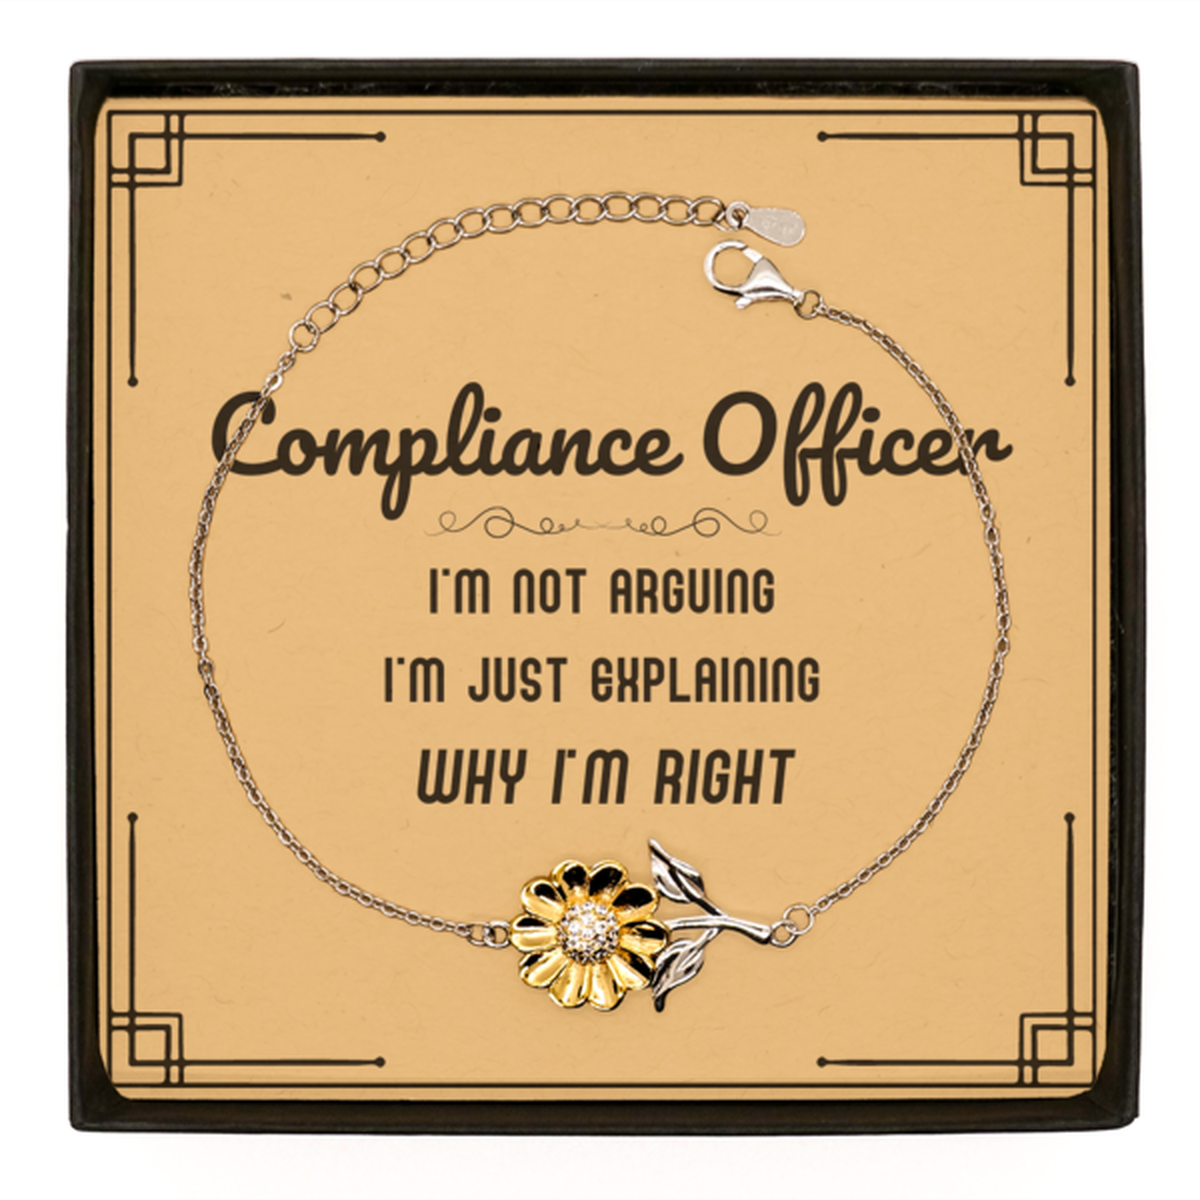 Compliance Officer I'm not Arguing. I'm Just Explaining Why I'm RIGHT Sunflower Bracelet, Funny Saying Quote Compliance Officer Gifts For Compliance Officer Message Card Graduation Birthday Christmas Gifts for Men Women Coworker